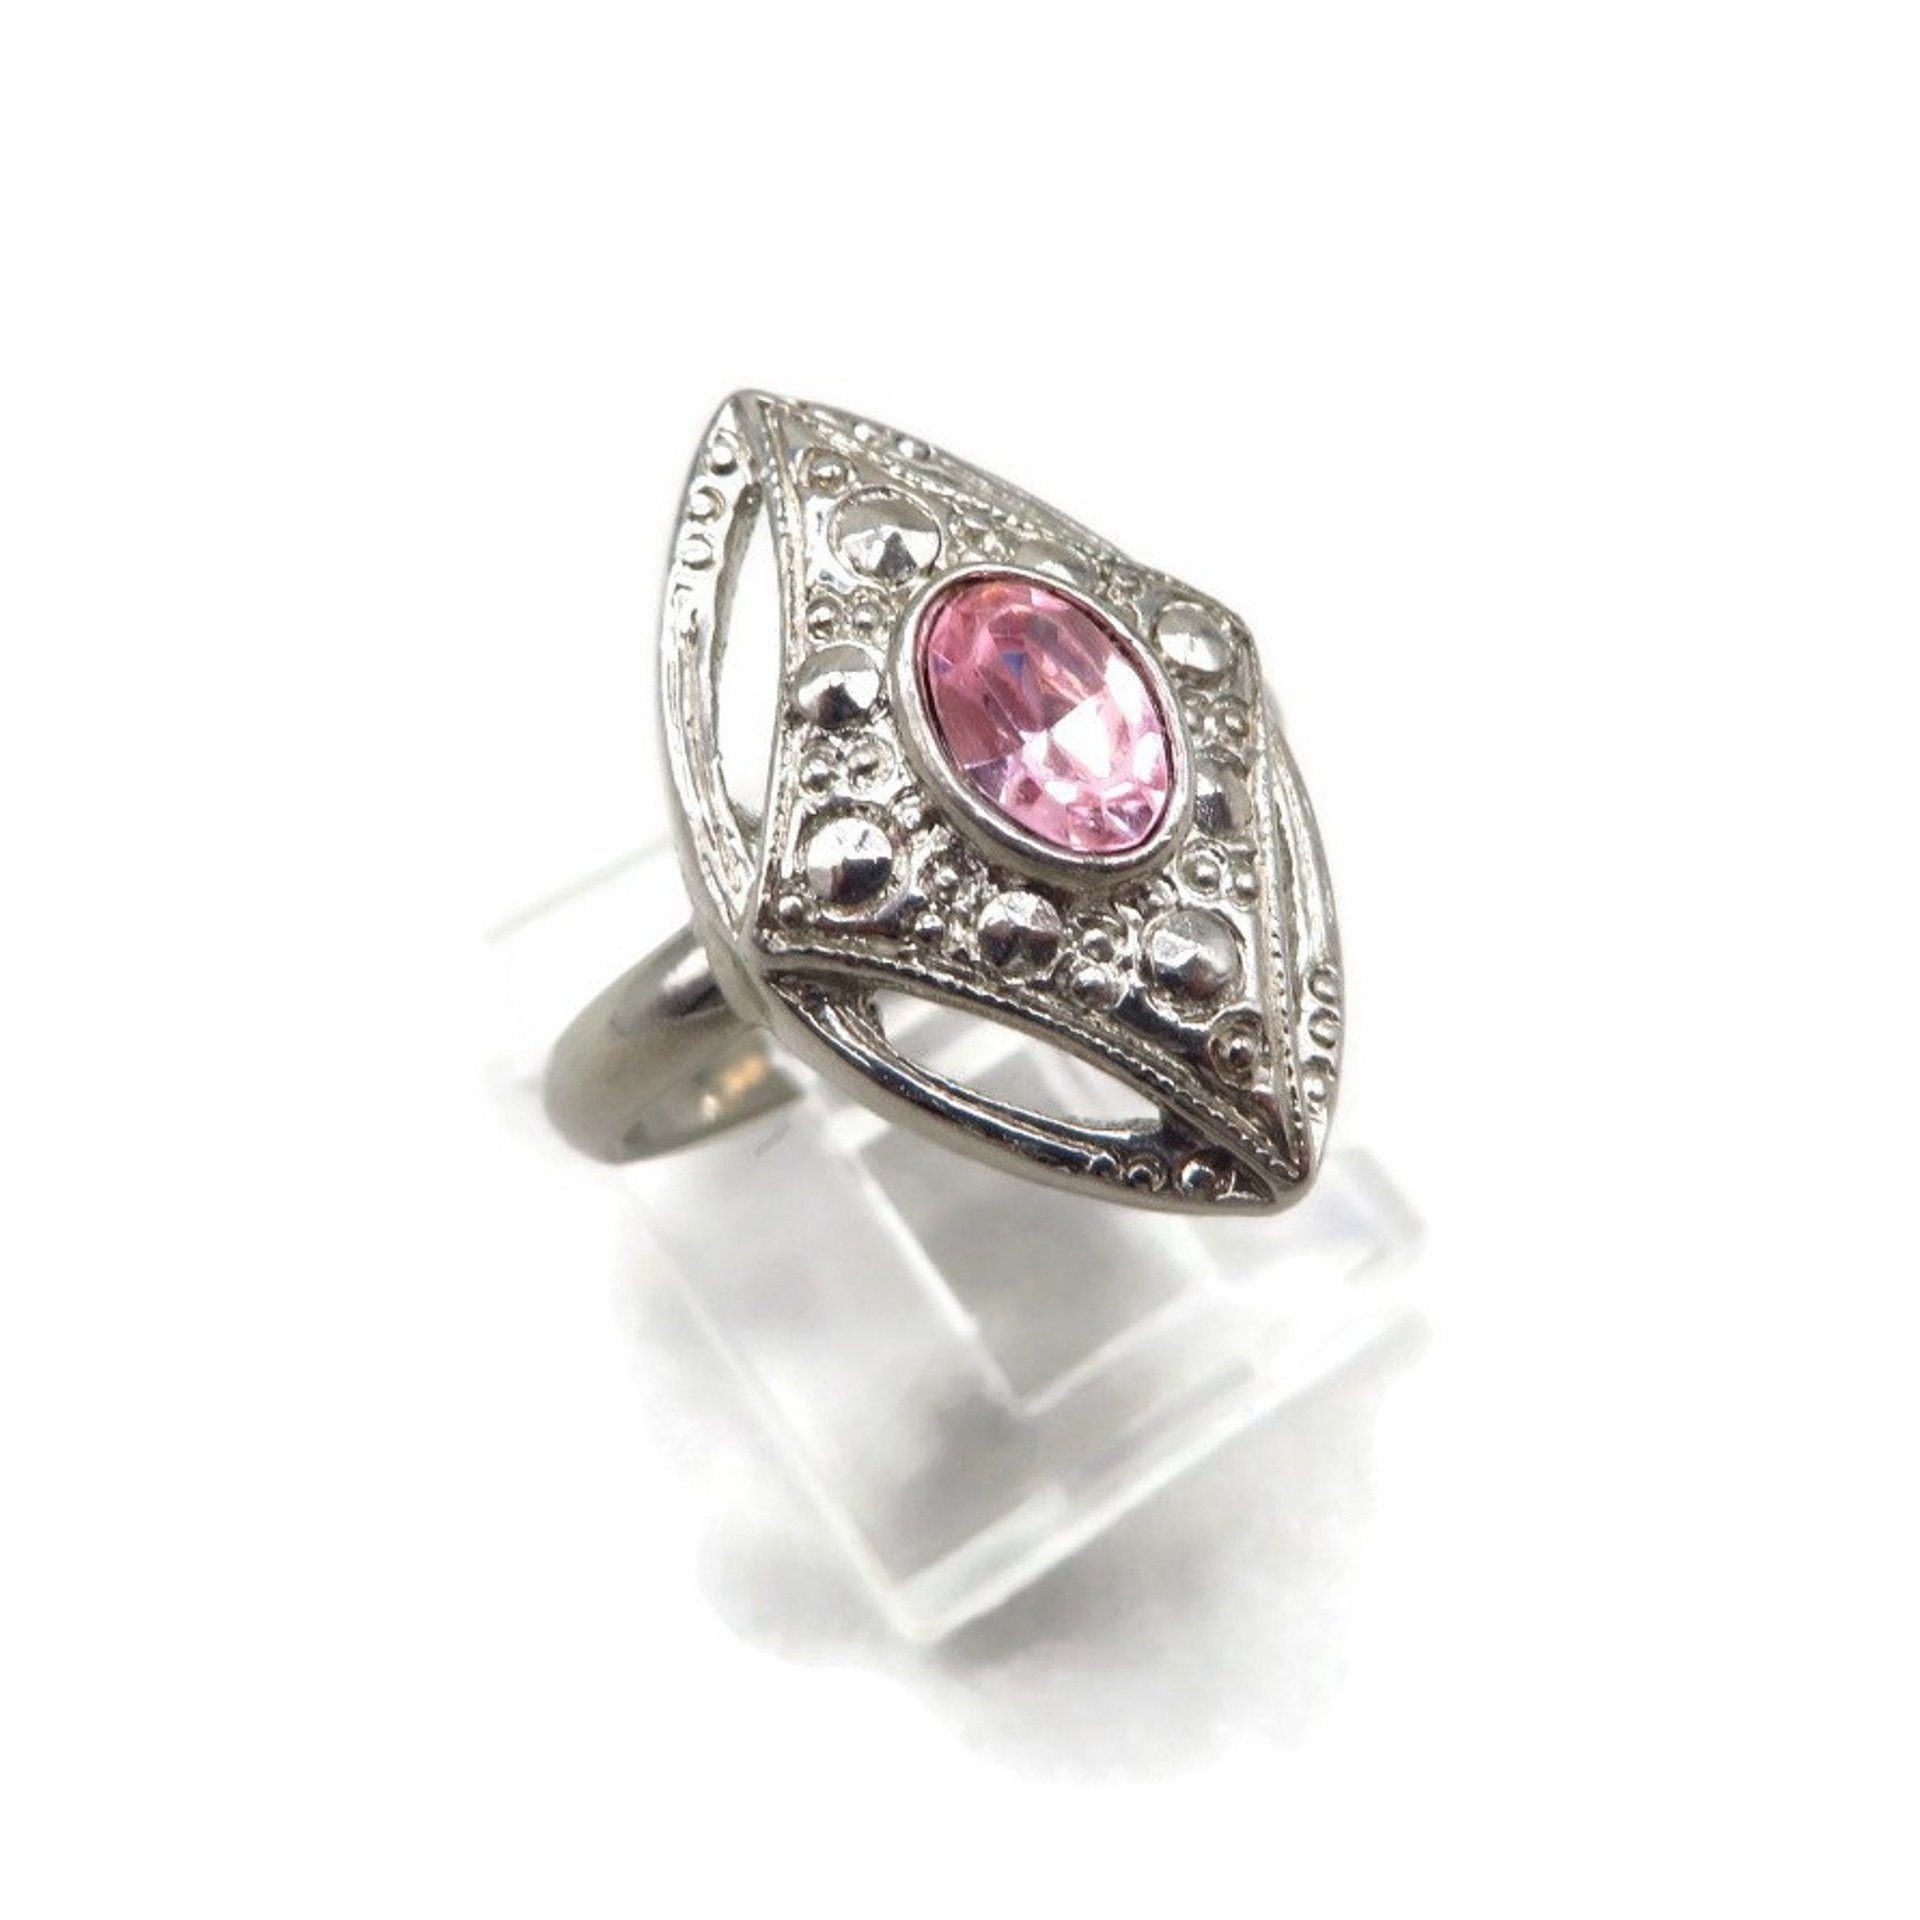 AVON Pink Glass, Beaded Silver Tone Fashion Ring, Size 6